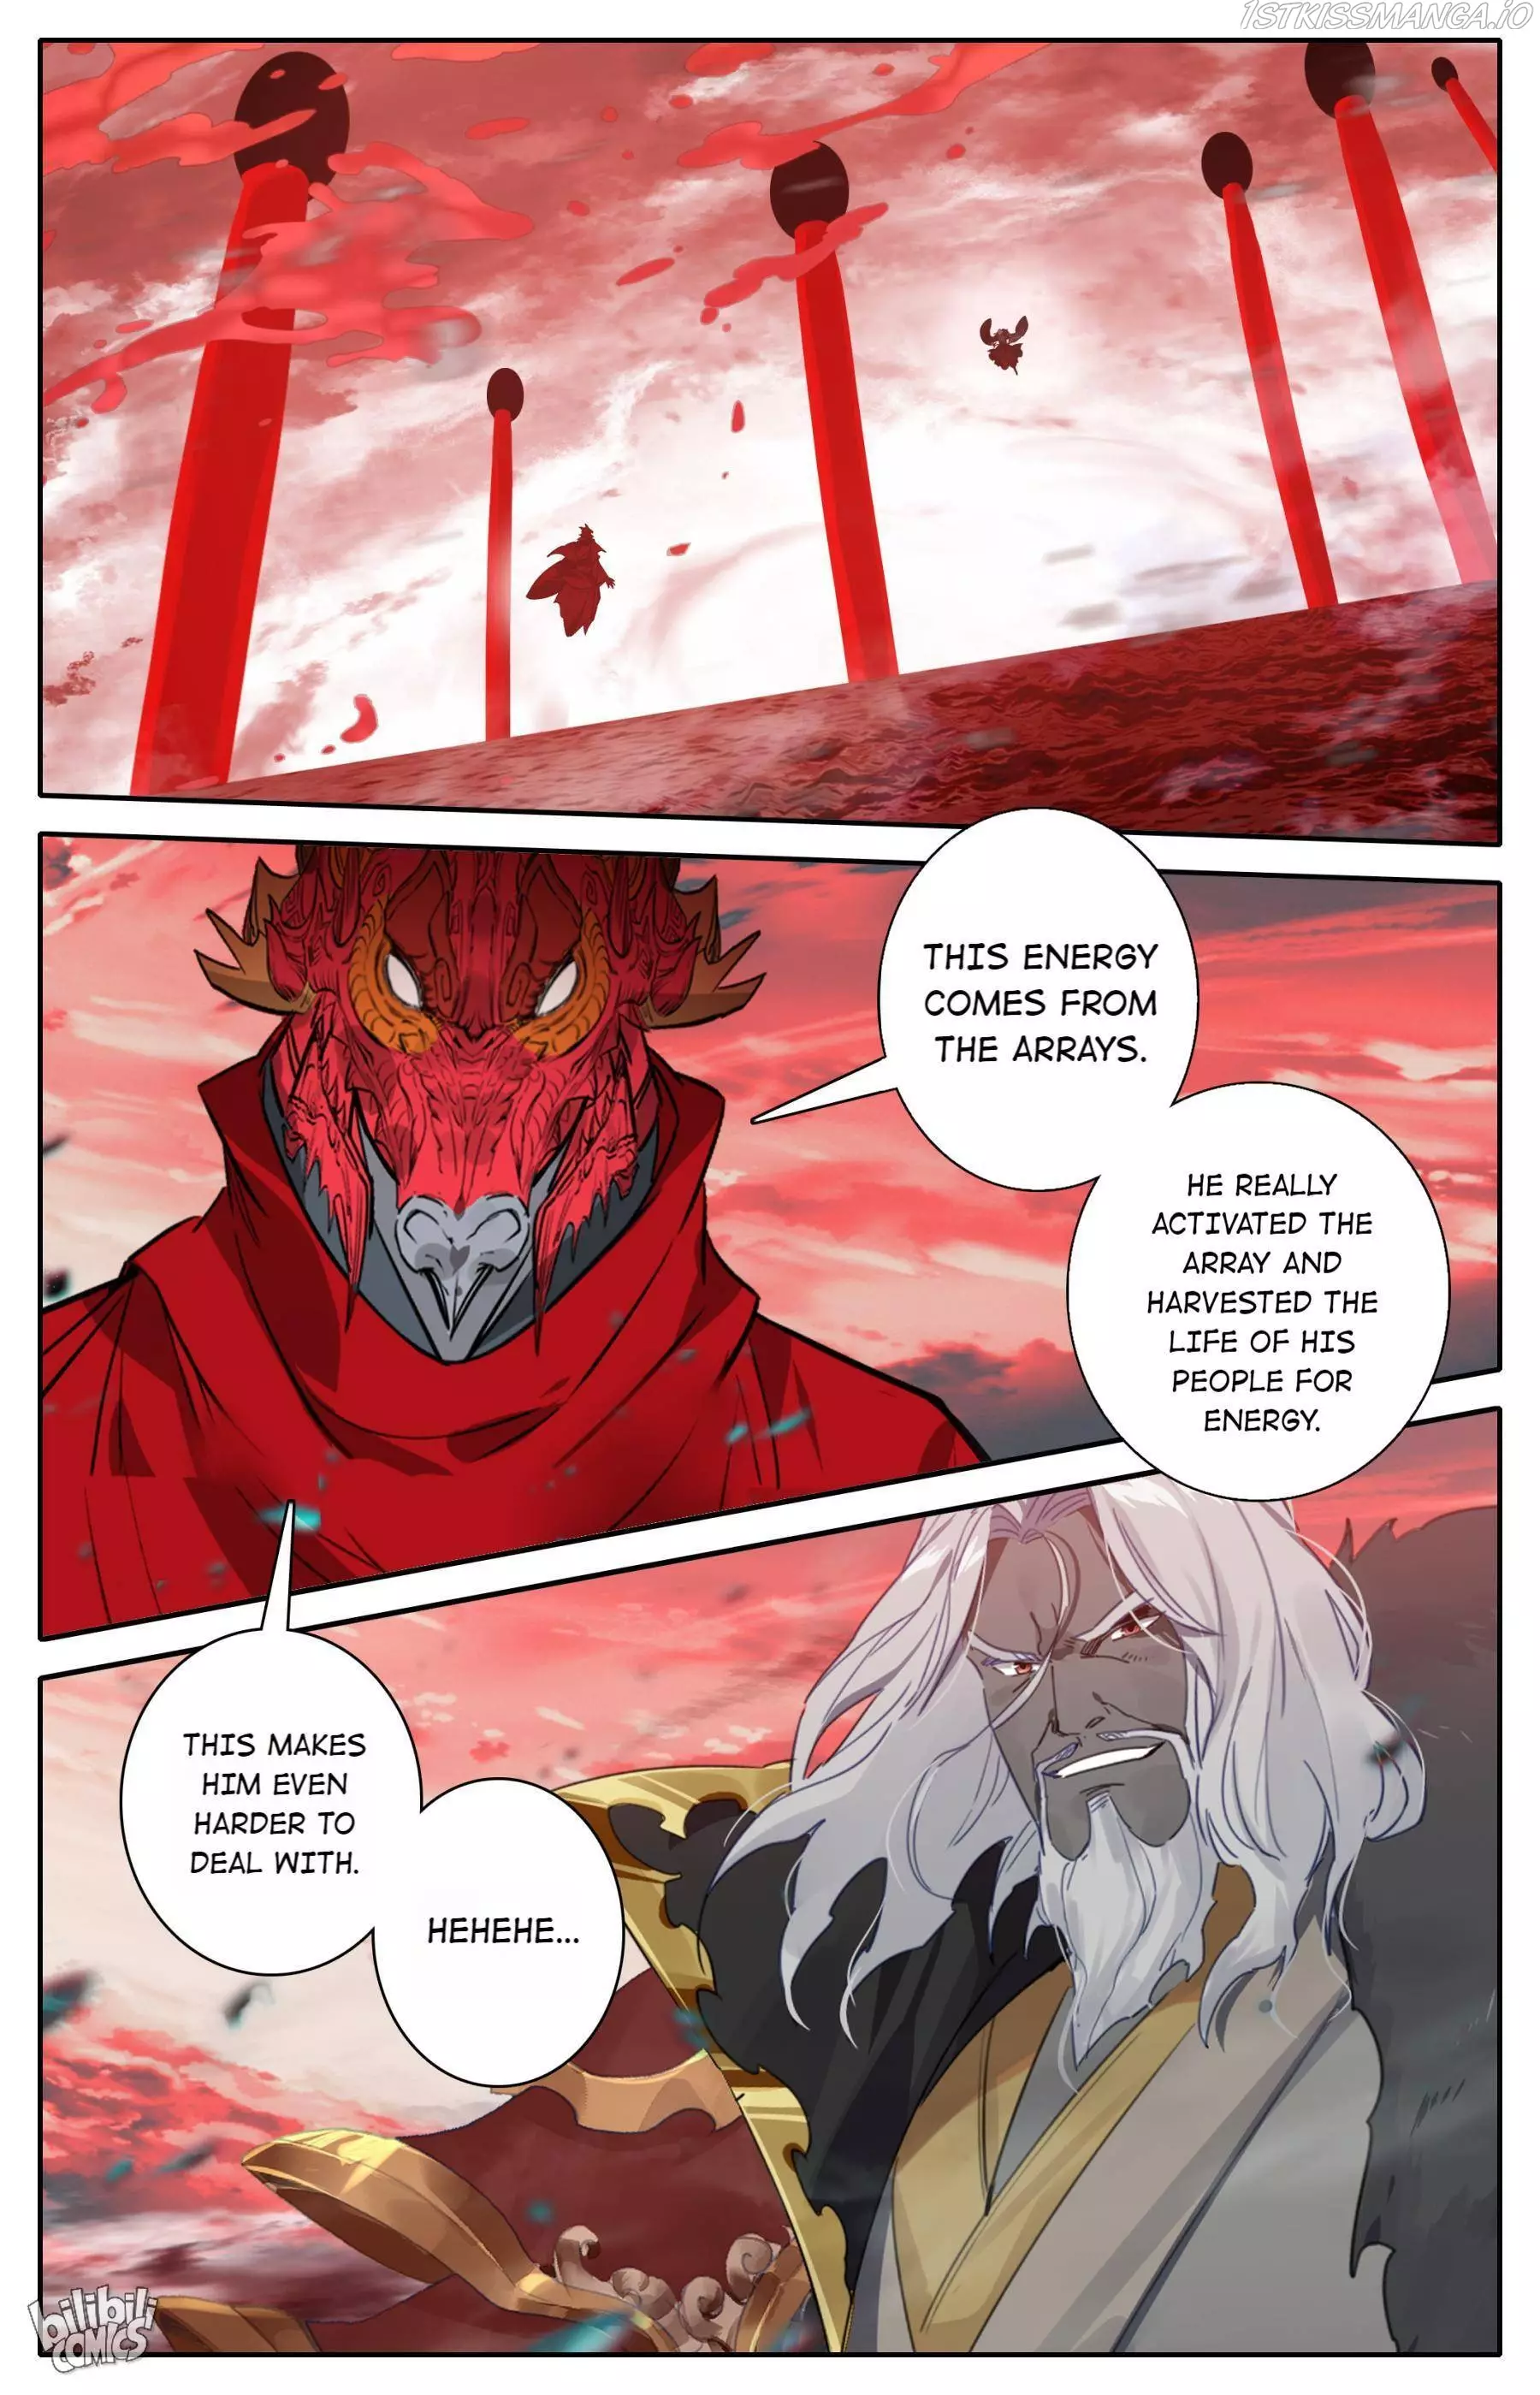 A Record Of A Mortal's Journey To Immortality—Immortal World Arc - 122 page 2-3fc990ec